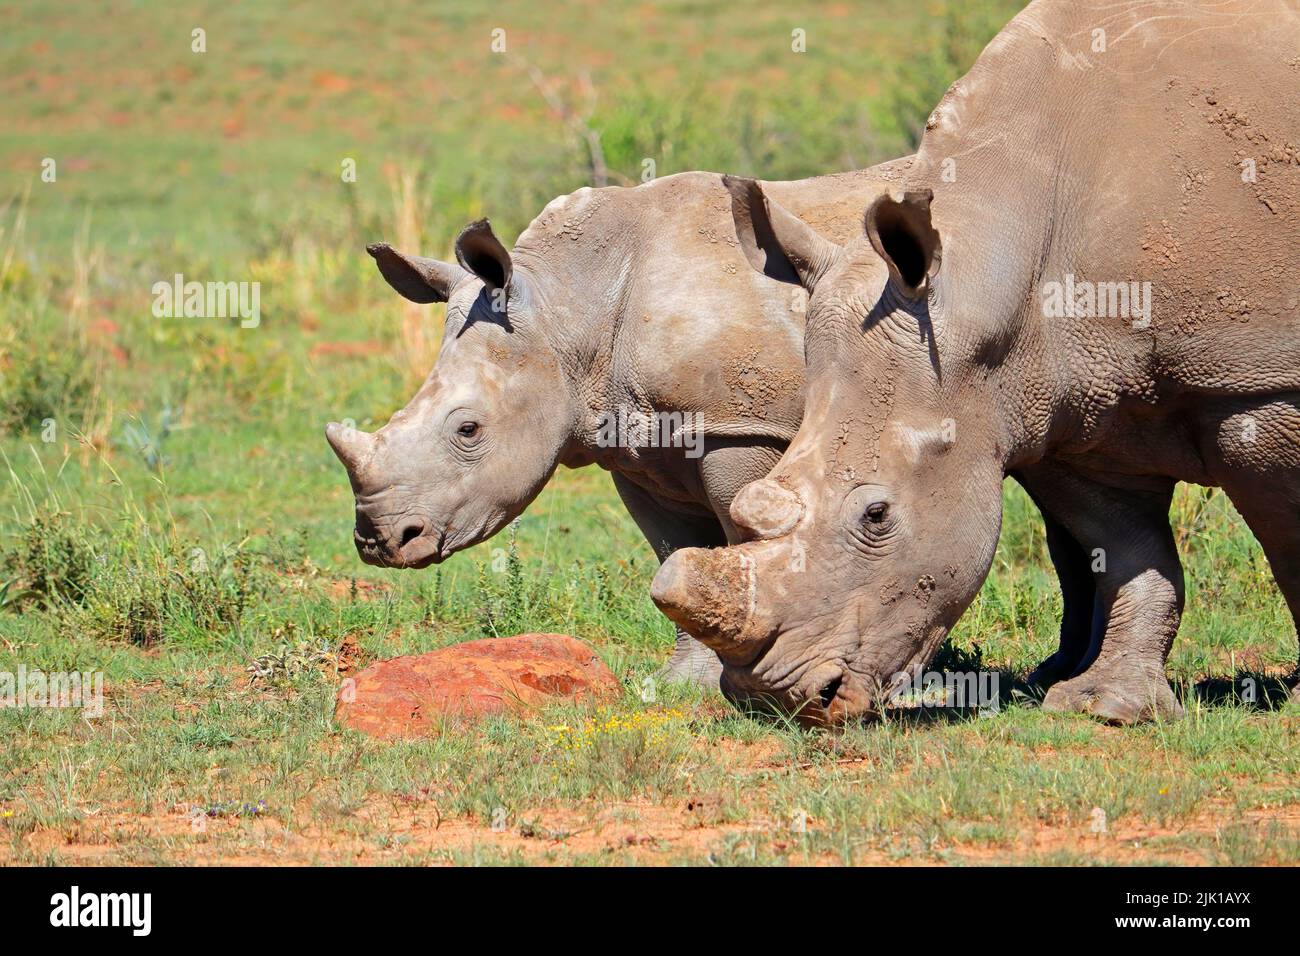 Portrait of a white rhinoceros (Ceratotherium simum) with calf, South Africa Stock Photo